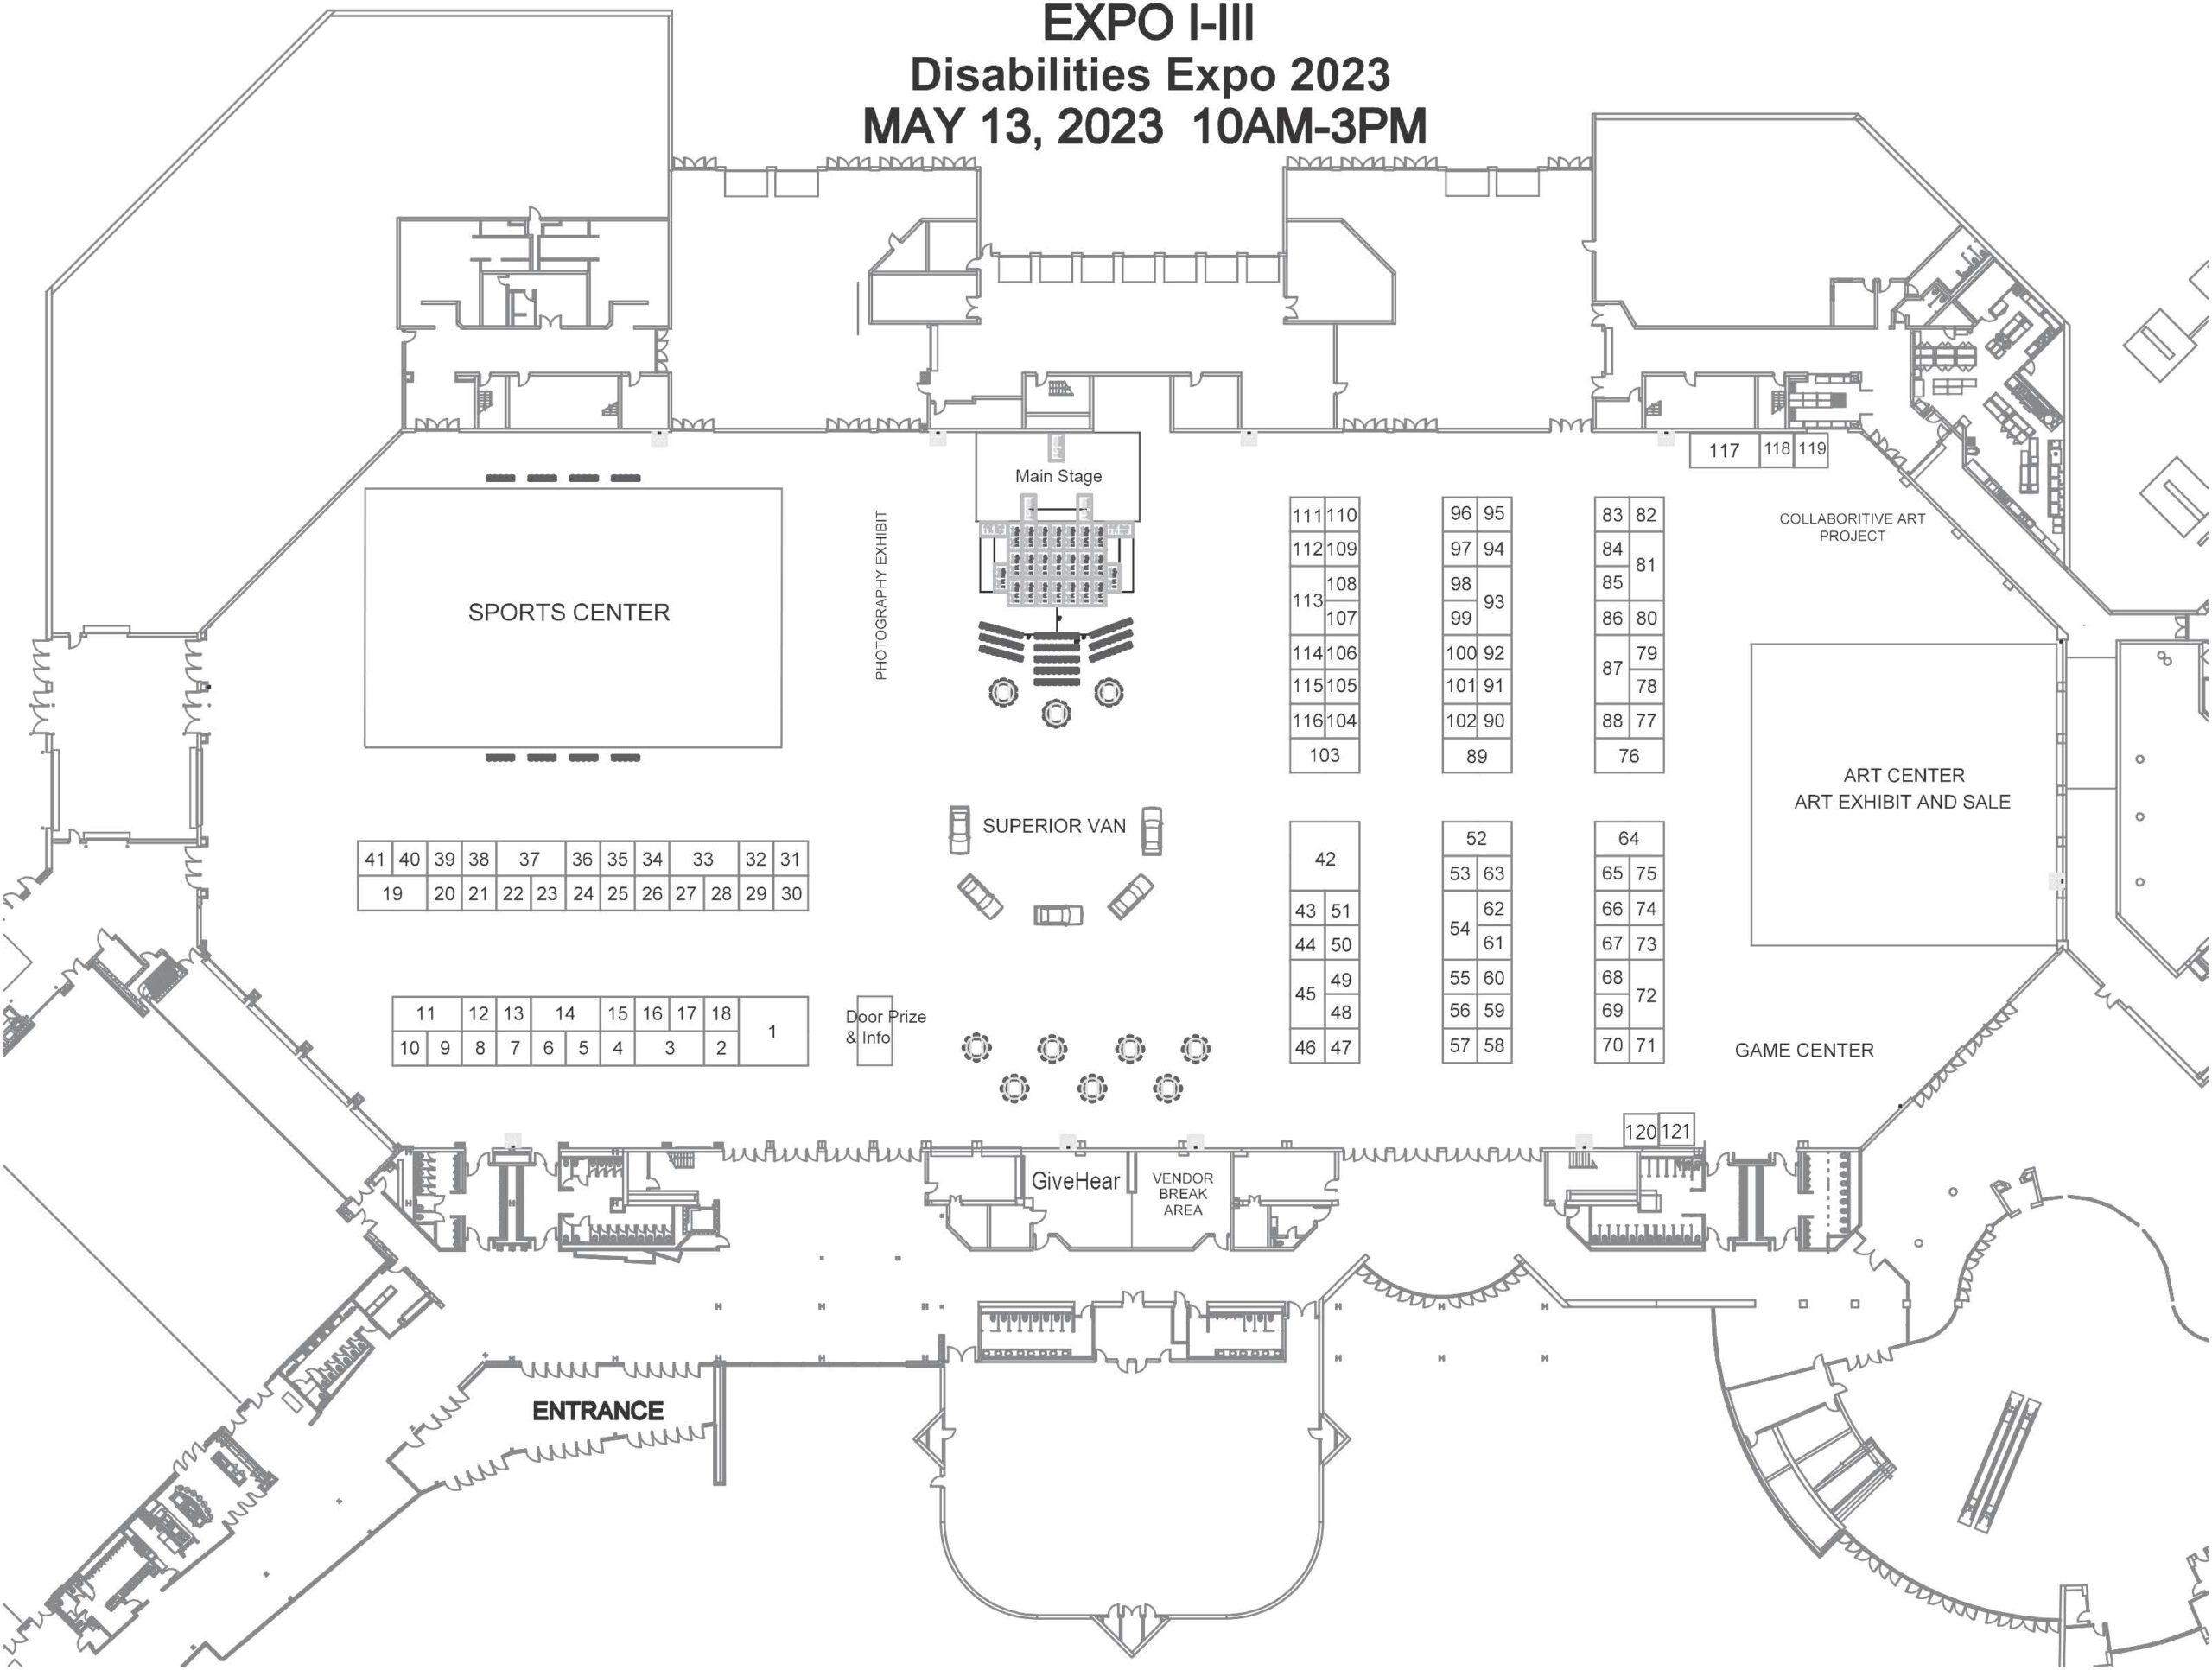 Layout of expo